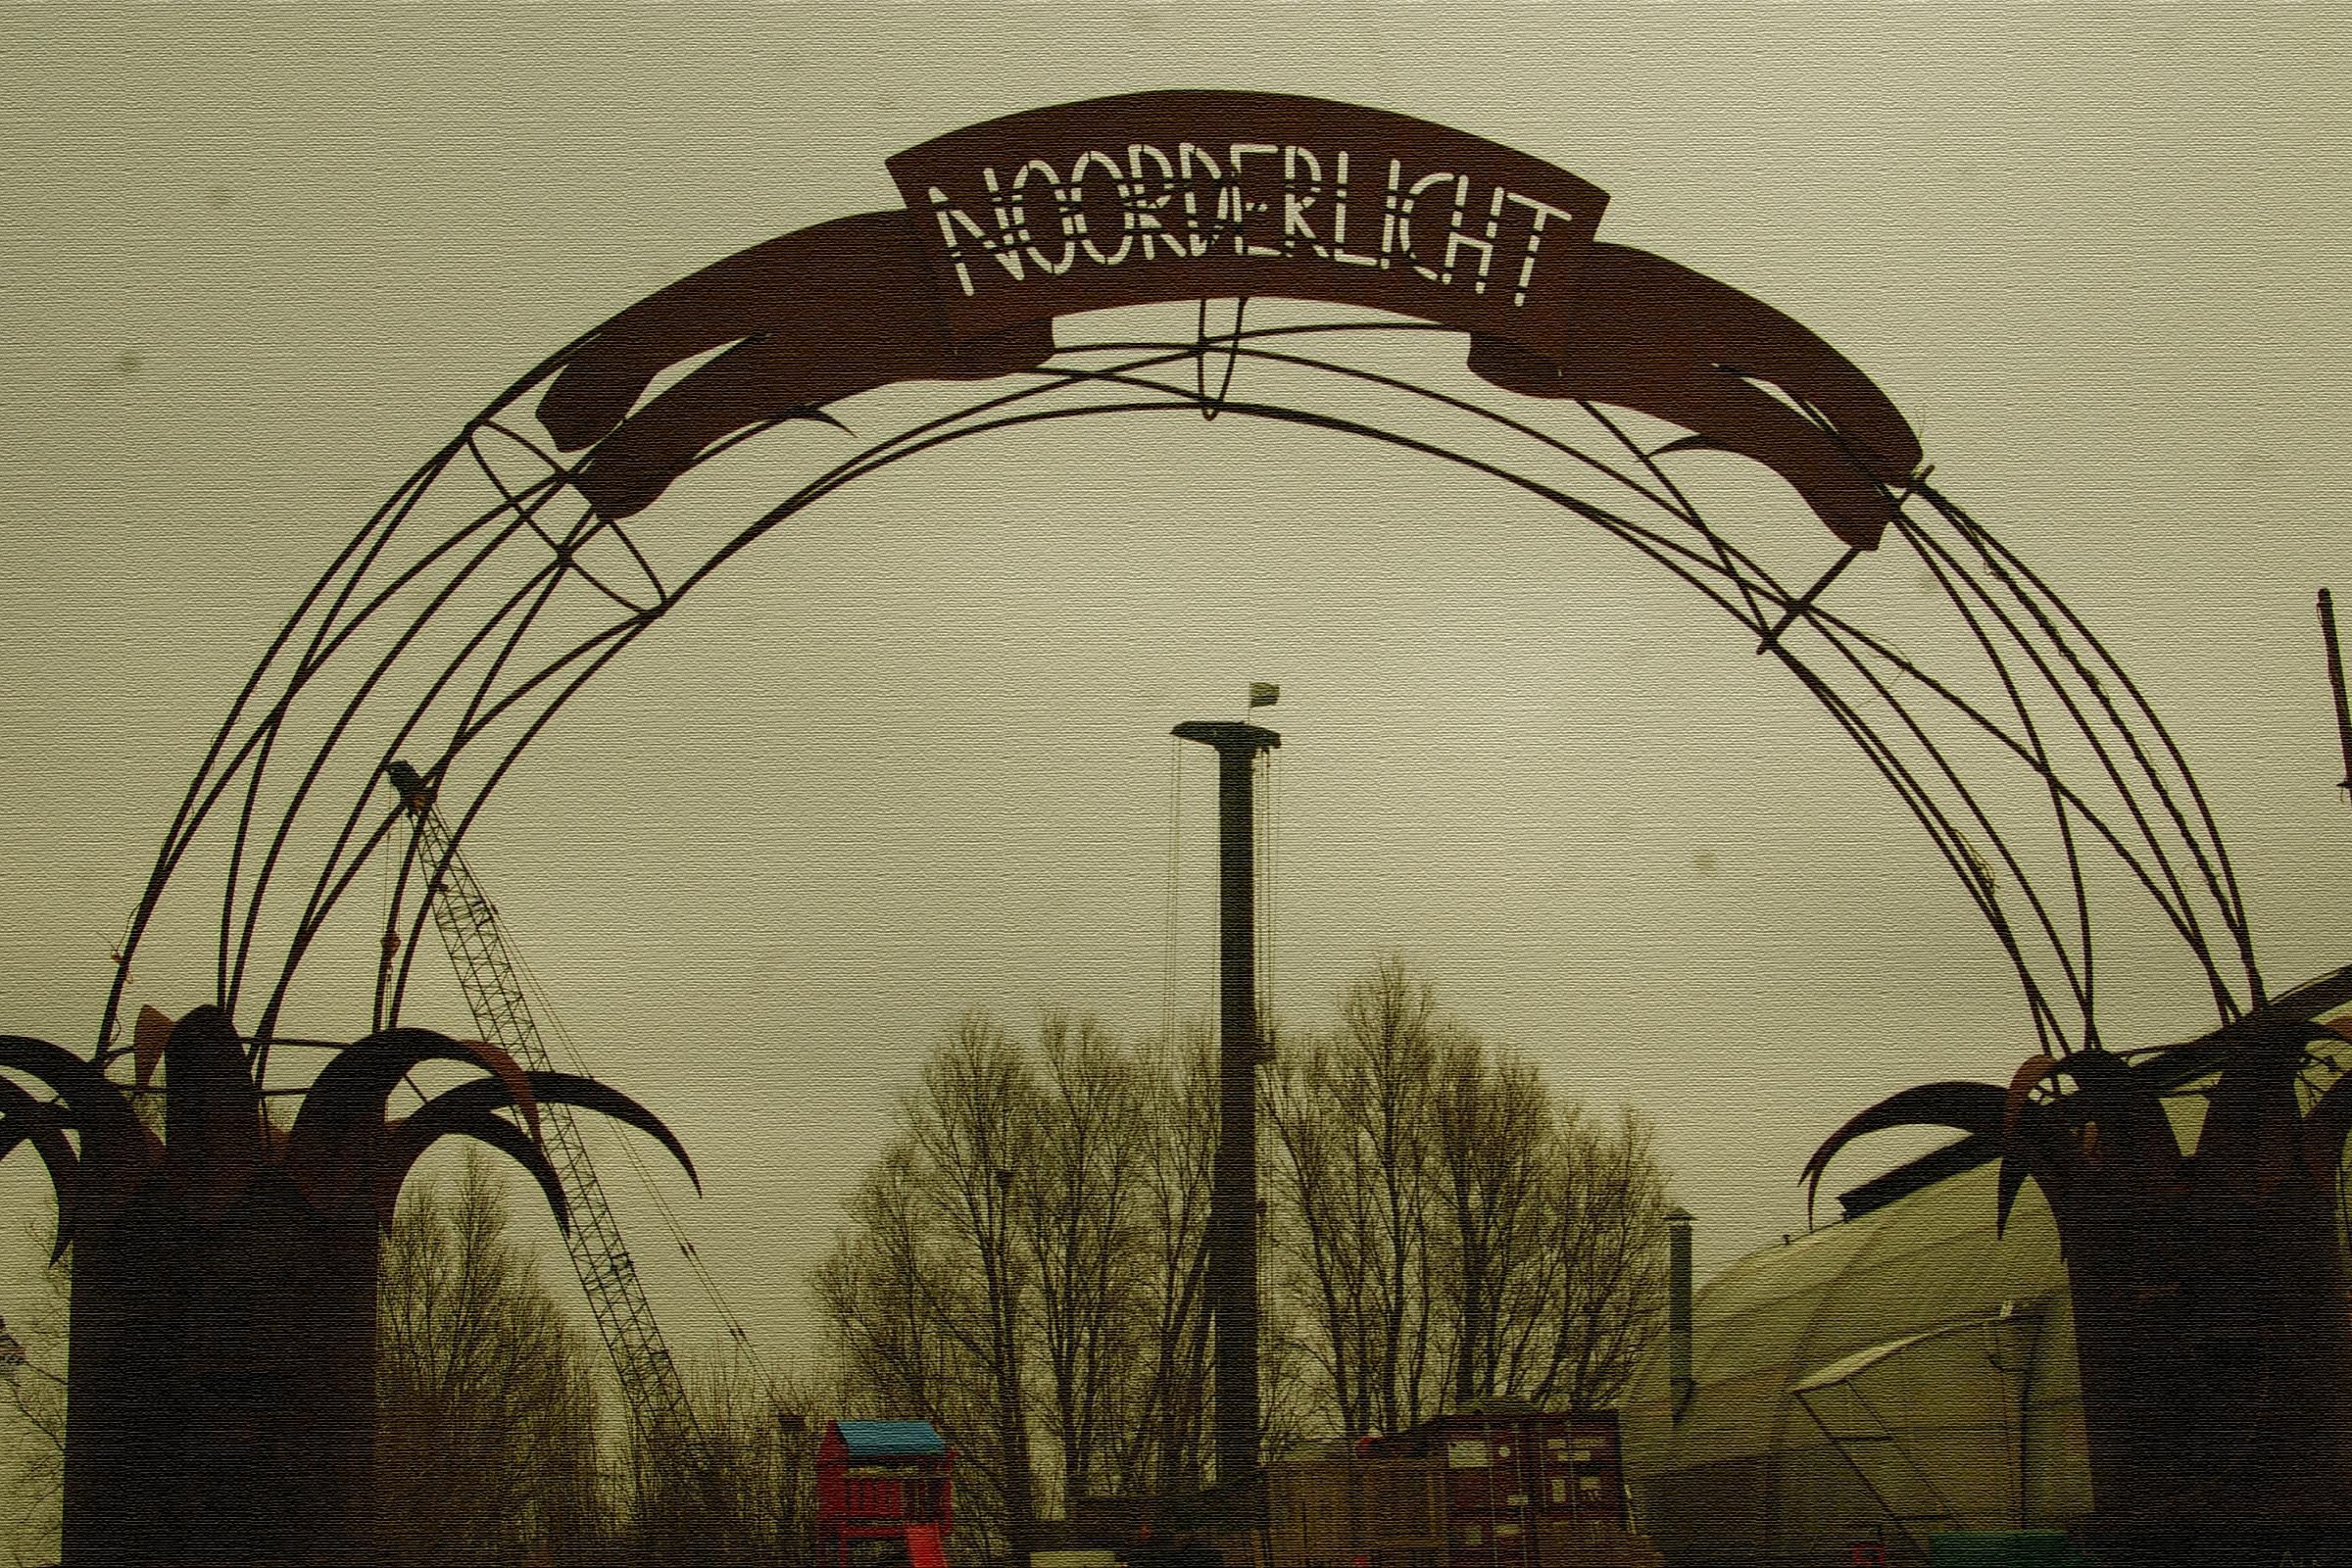 Cover image of this place Noorderlicht